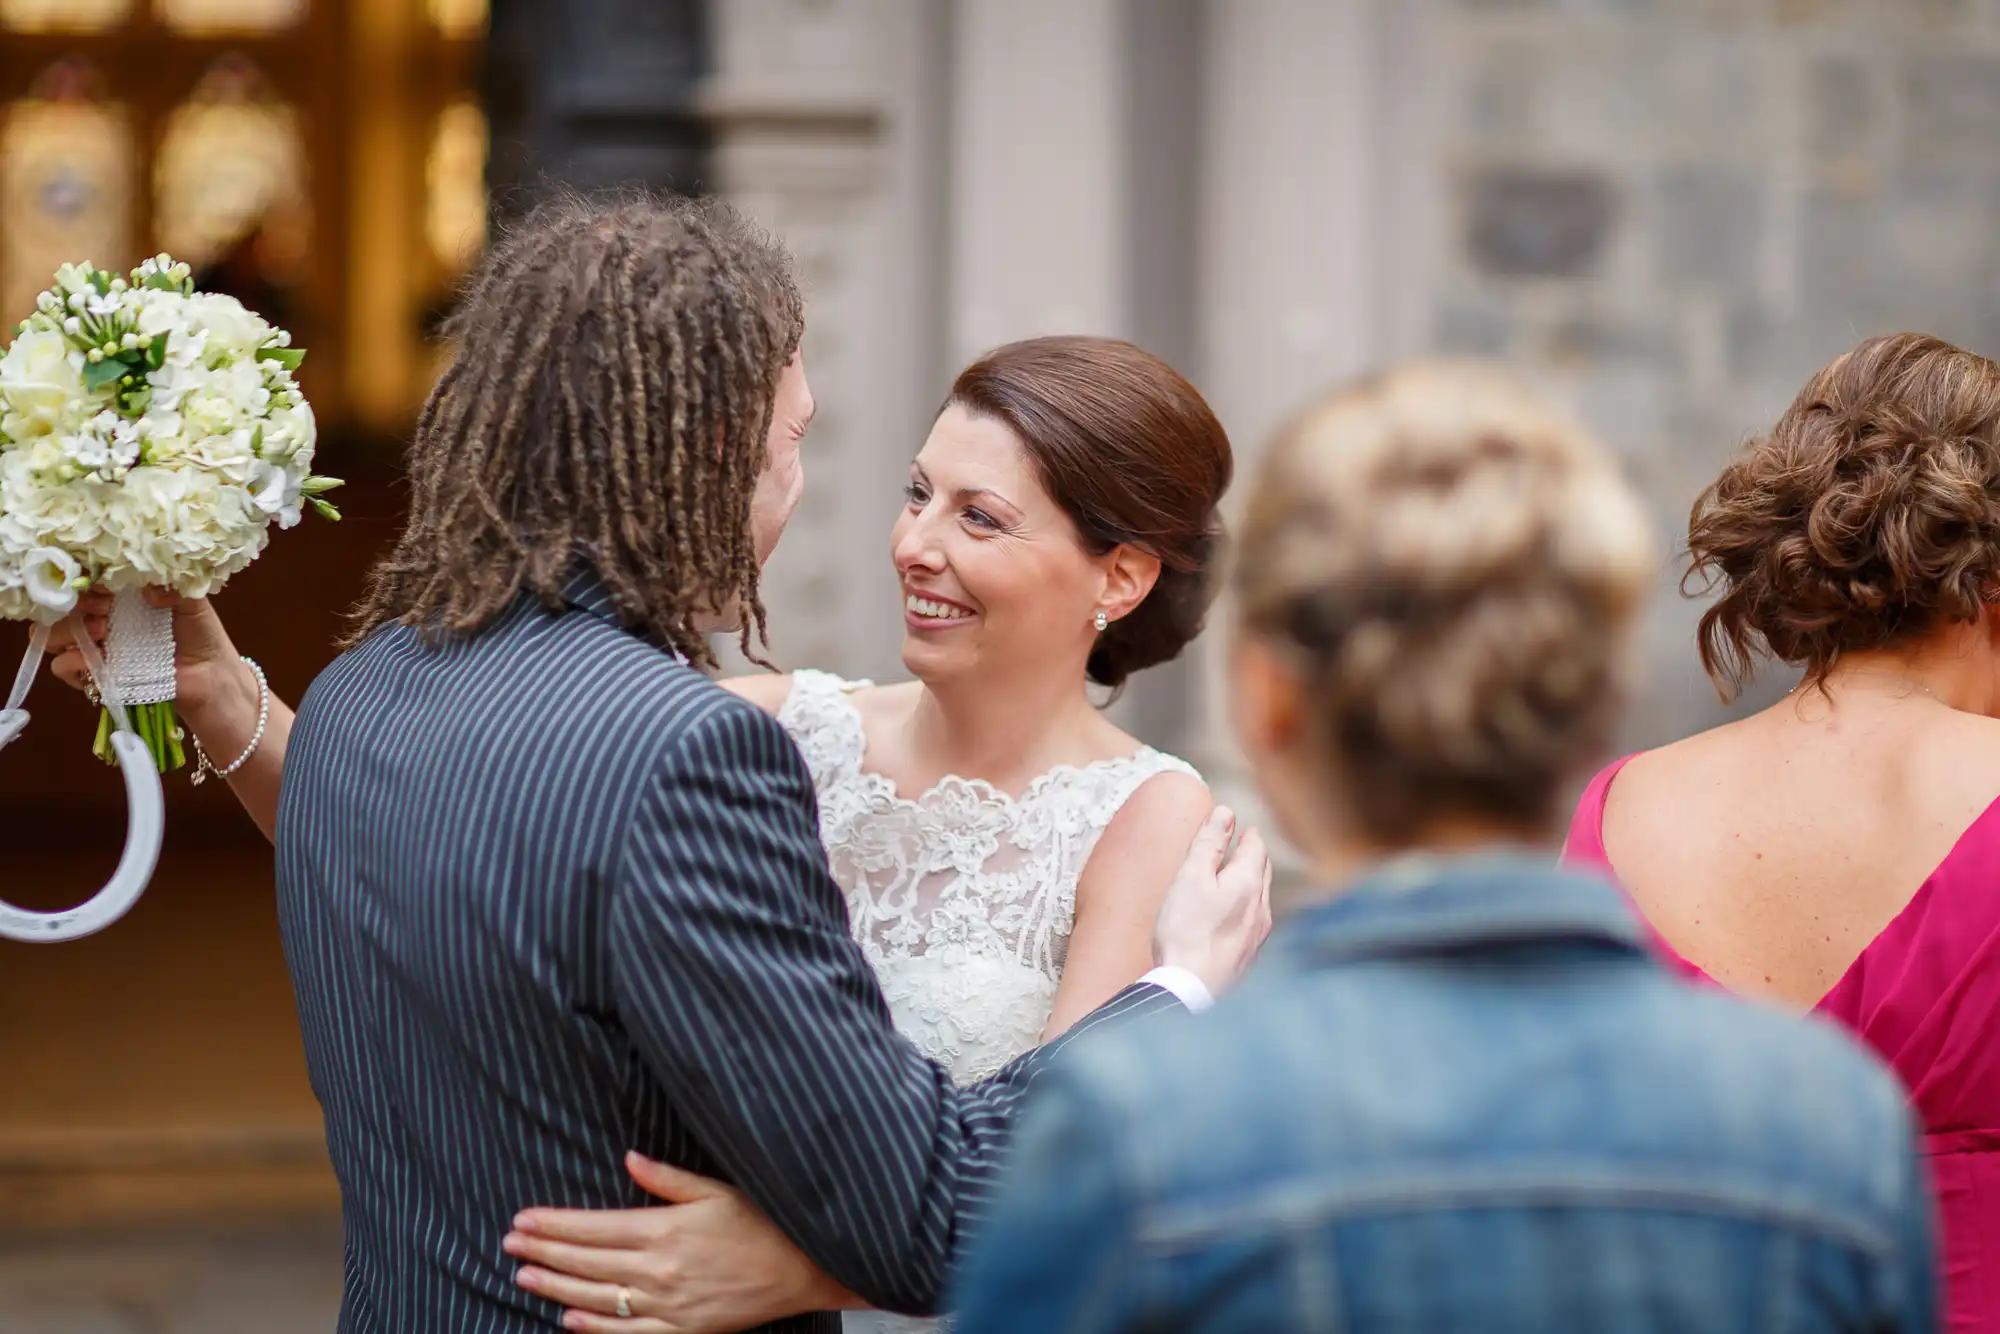 A bride in a lace dress and a groom in a striped suit embracing and smiling at each other, with guests nearby.